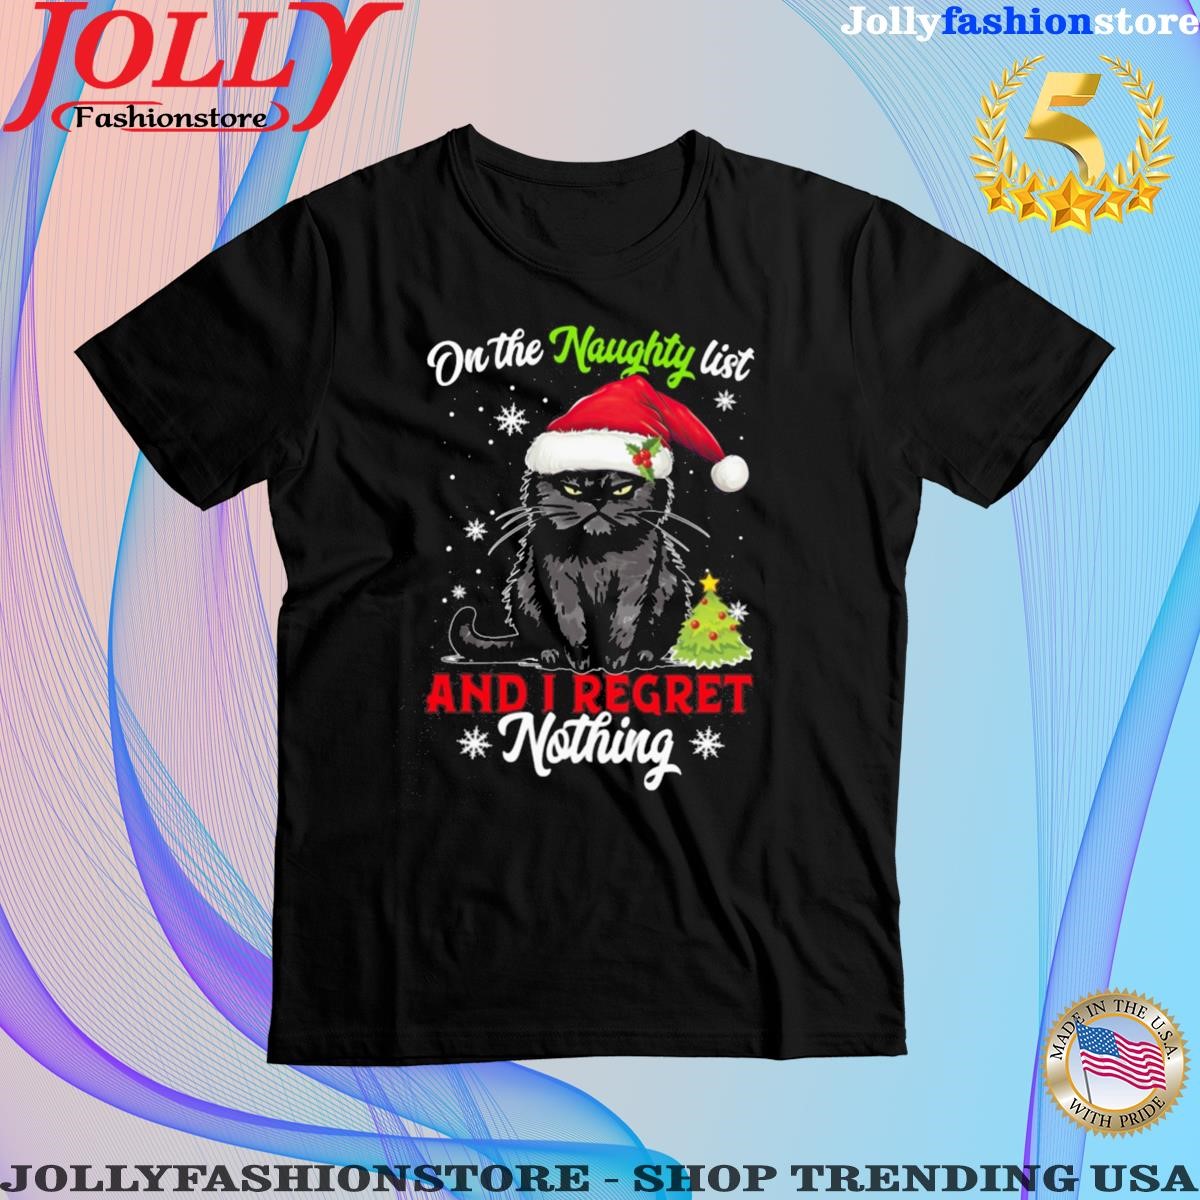 On the naughty list and I regret nothing black cat wearing noel hat Christmas Shirt